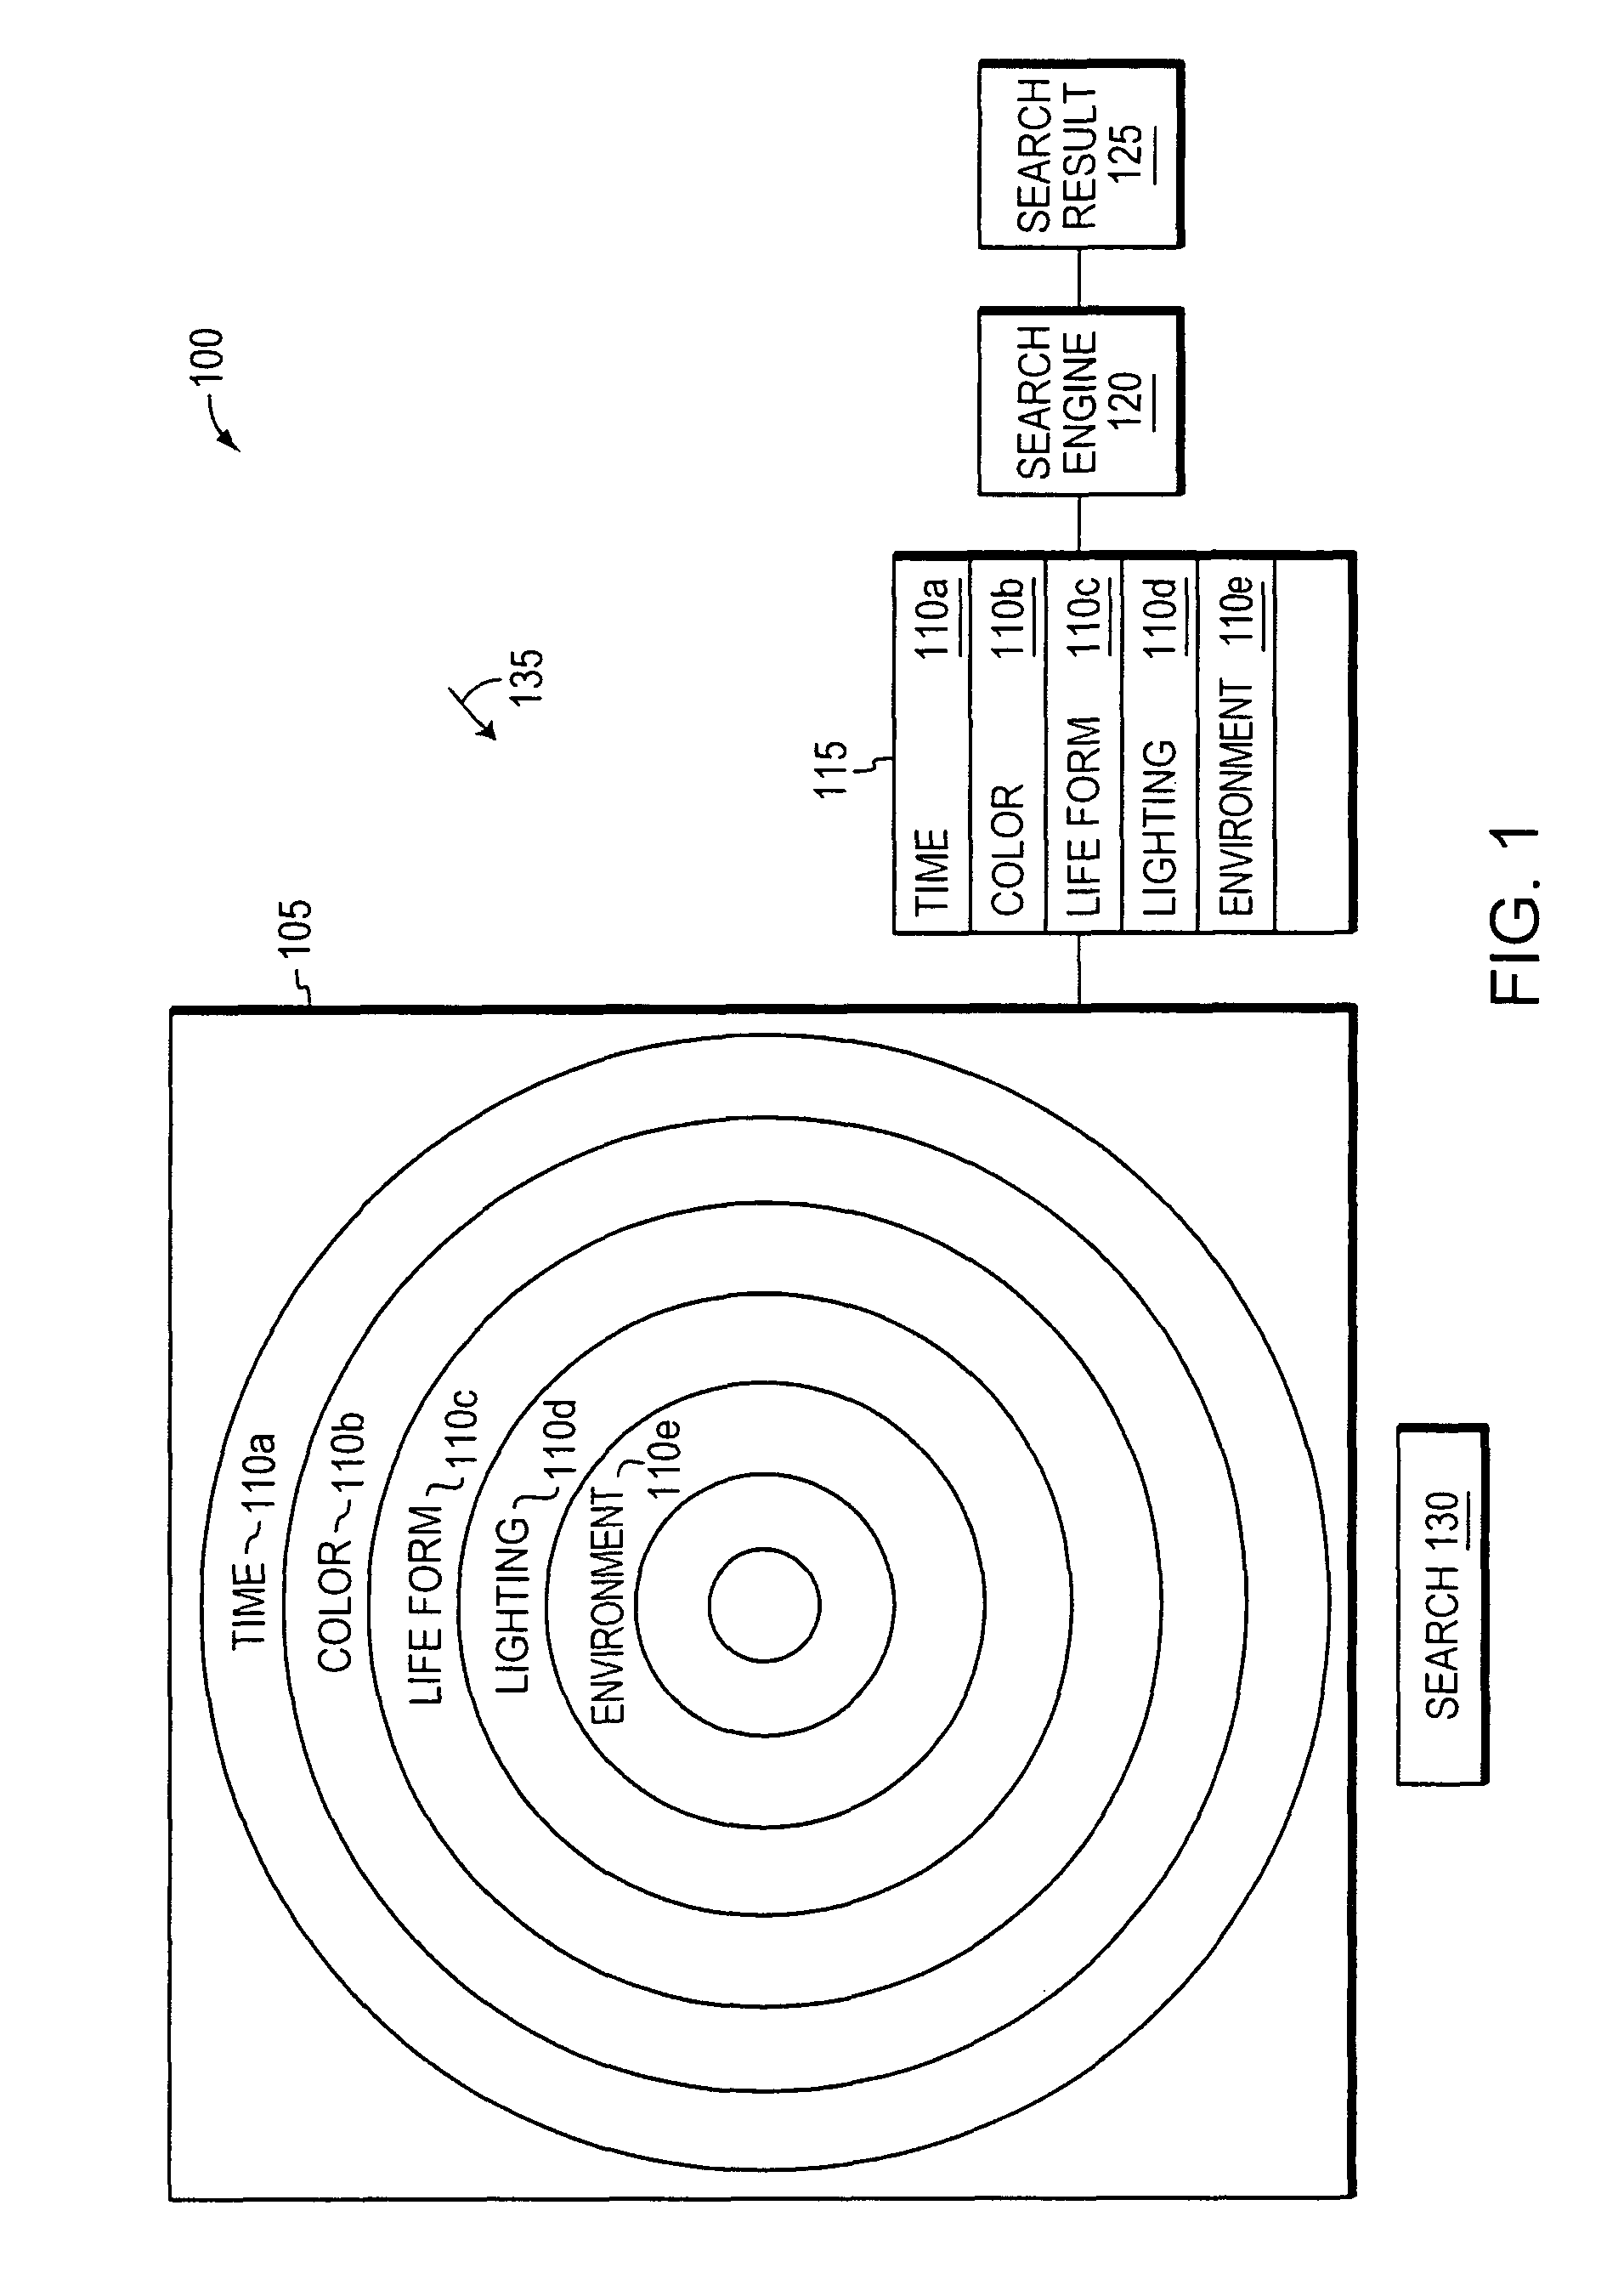 Multiple parameter data media search in a distributed network